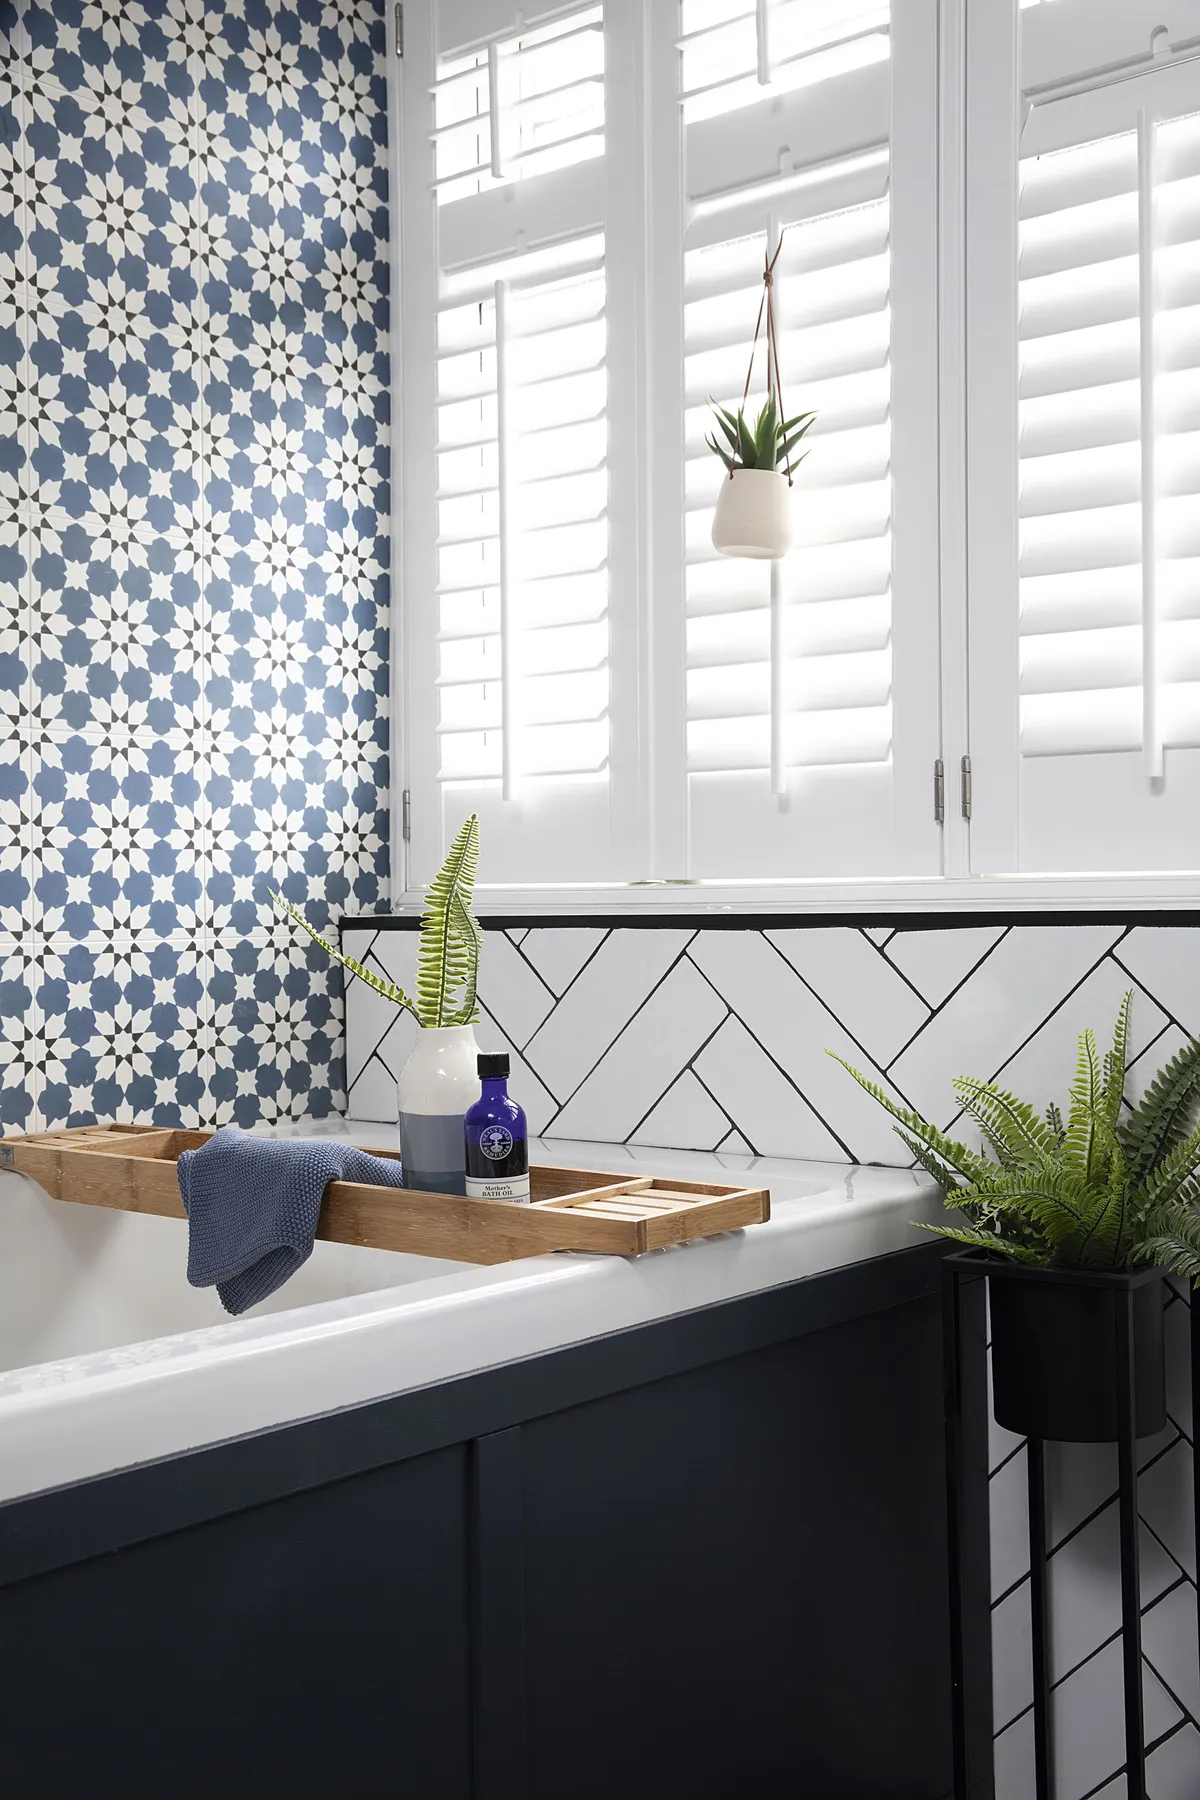 It’s the subtle touches as well as the statement tiles that give Claire’s scheme a holiday feel, including white window shutters and plants and succulents dotted around the space